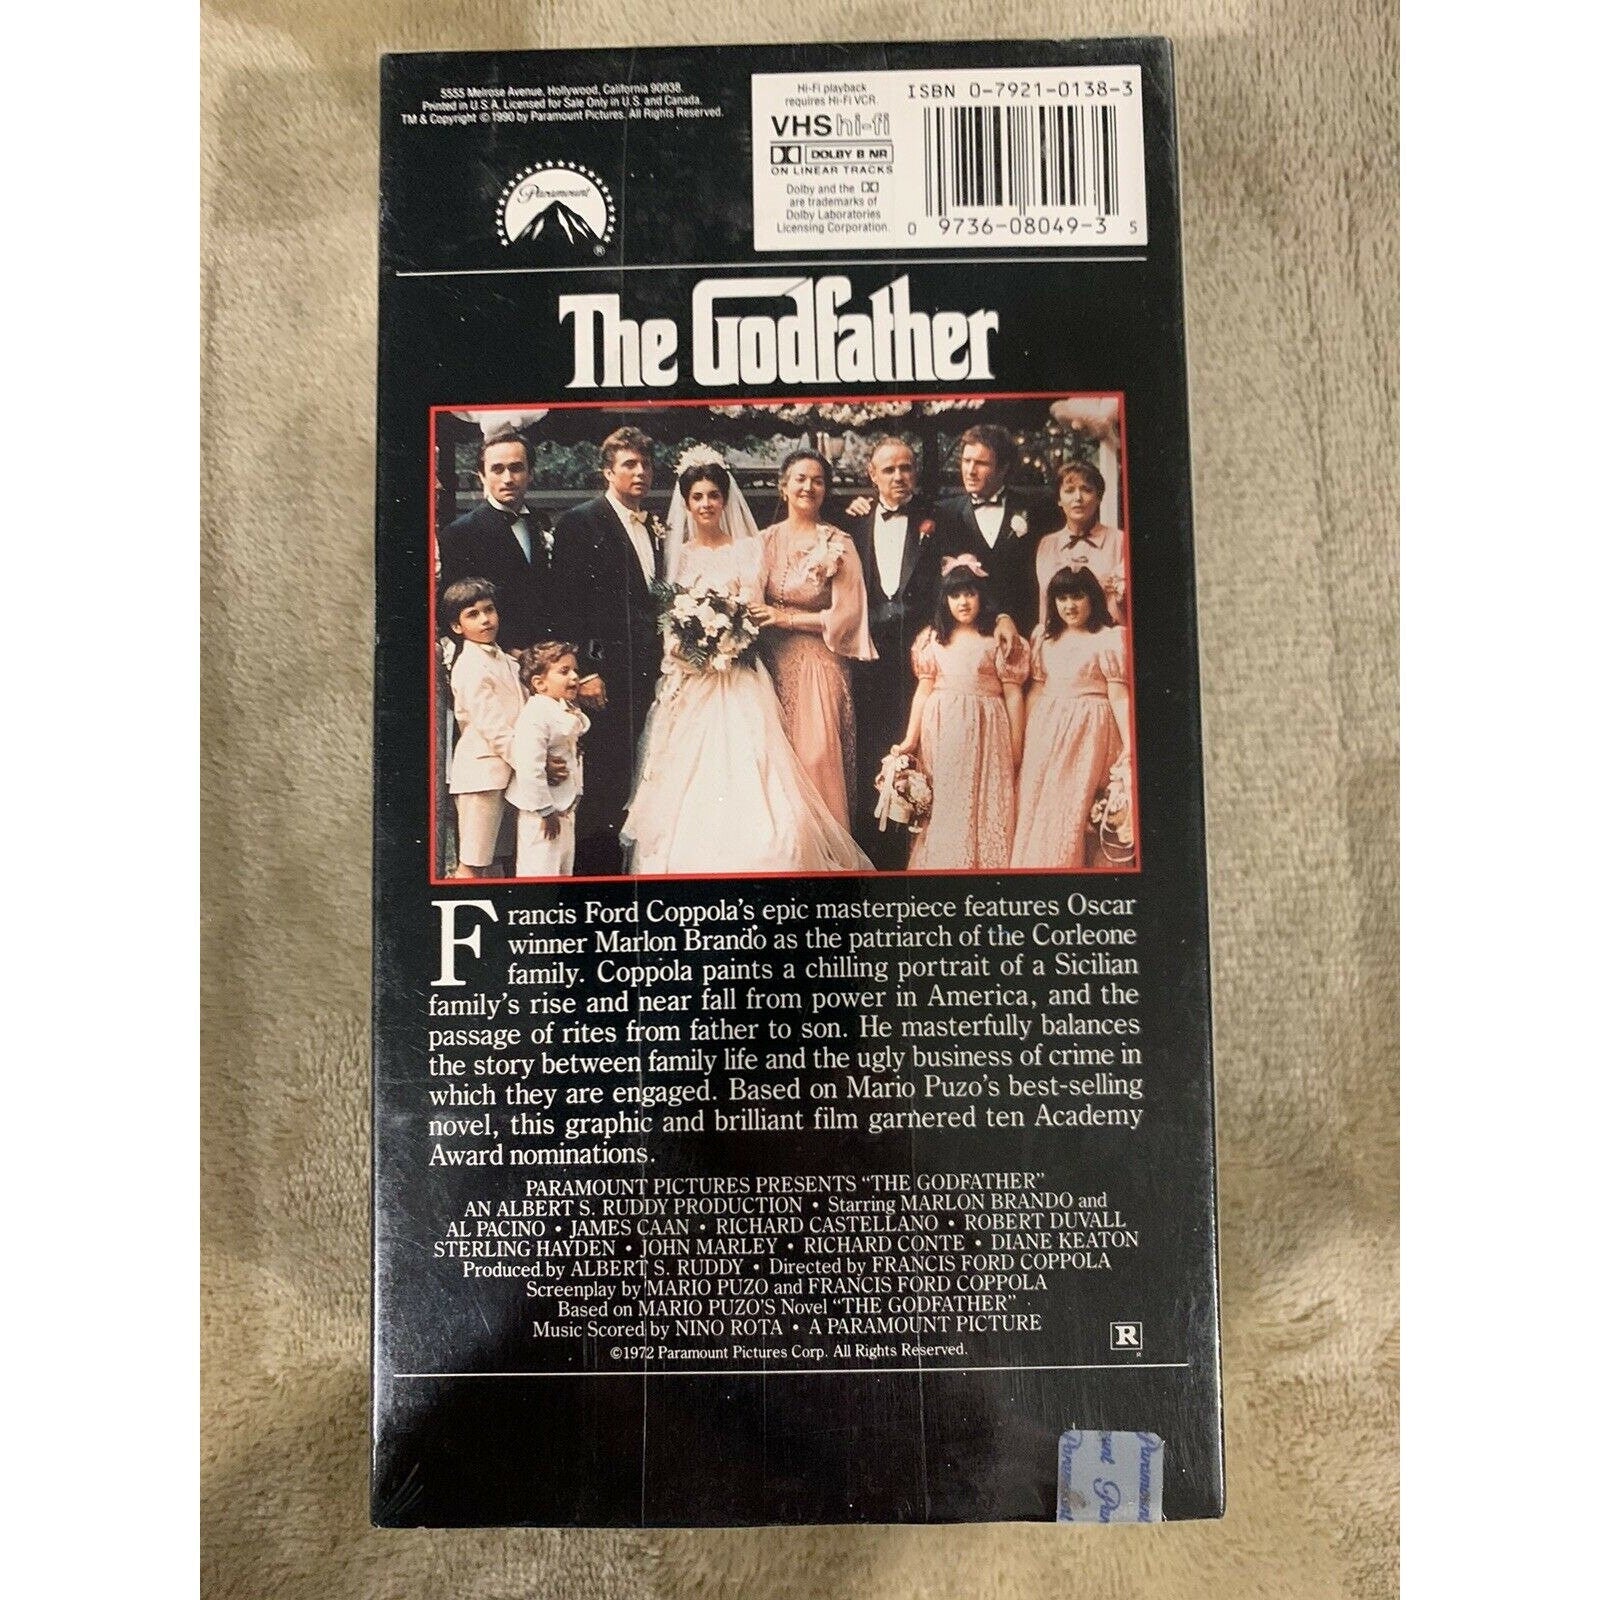 The Godfather (Unopened Double VHS, 1990)